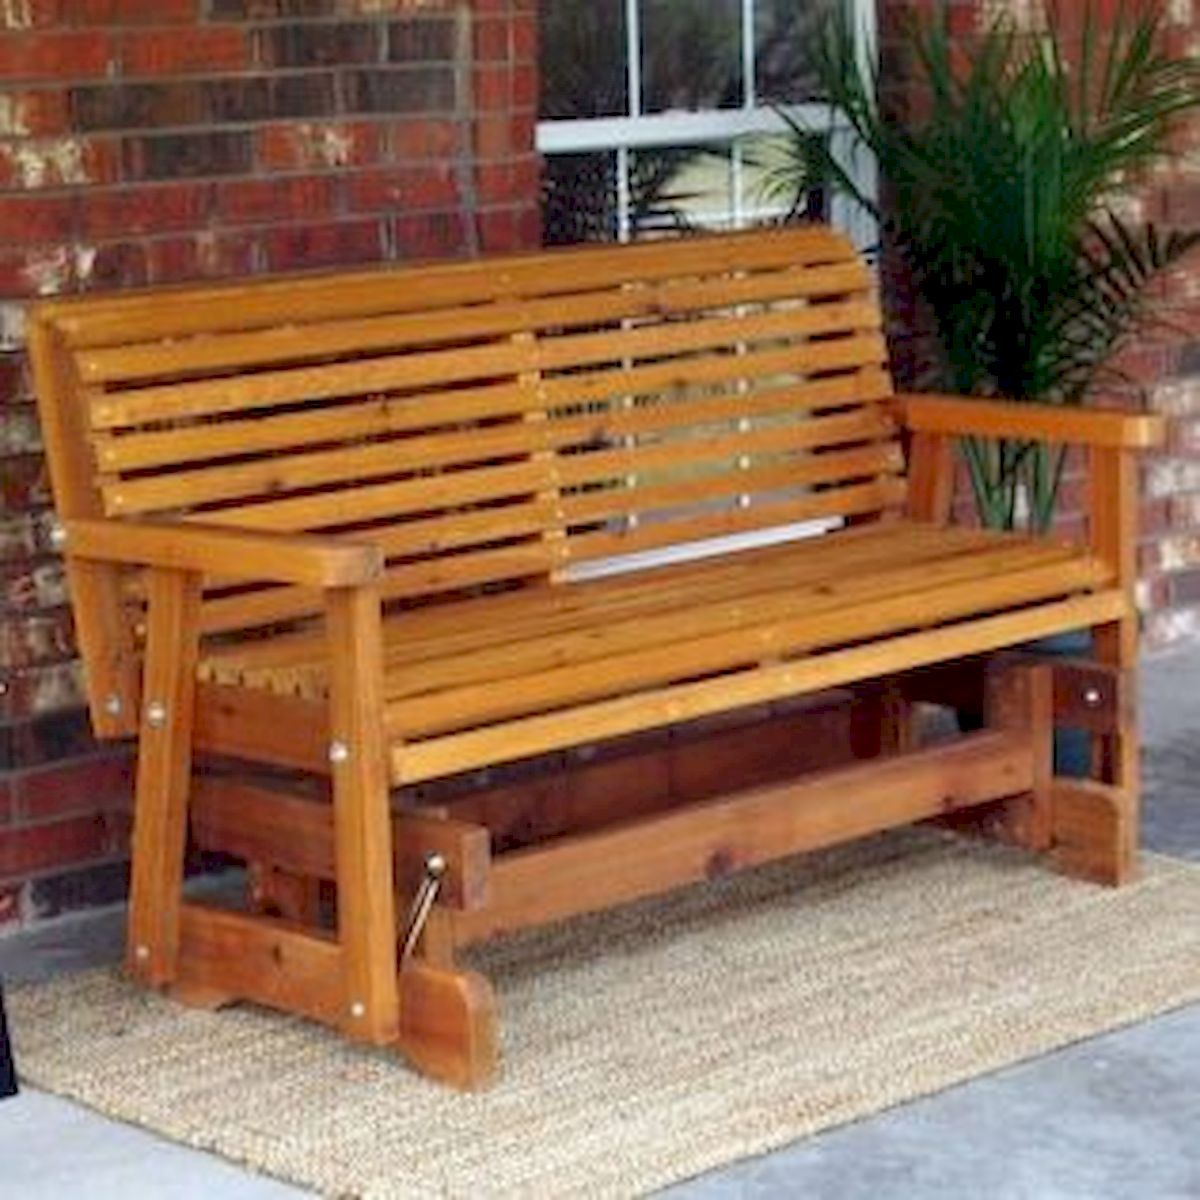 50 Amazing DIY Projects Outdoor Furniture Design Ideas (14)